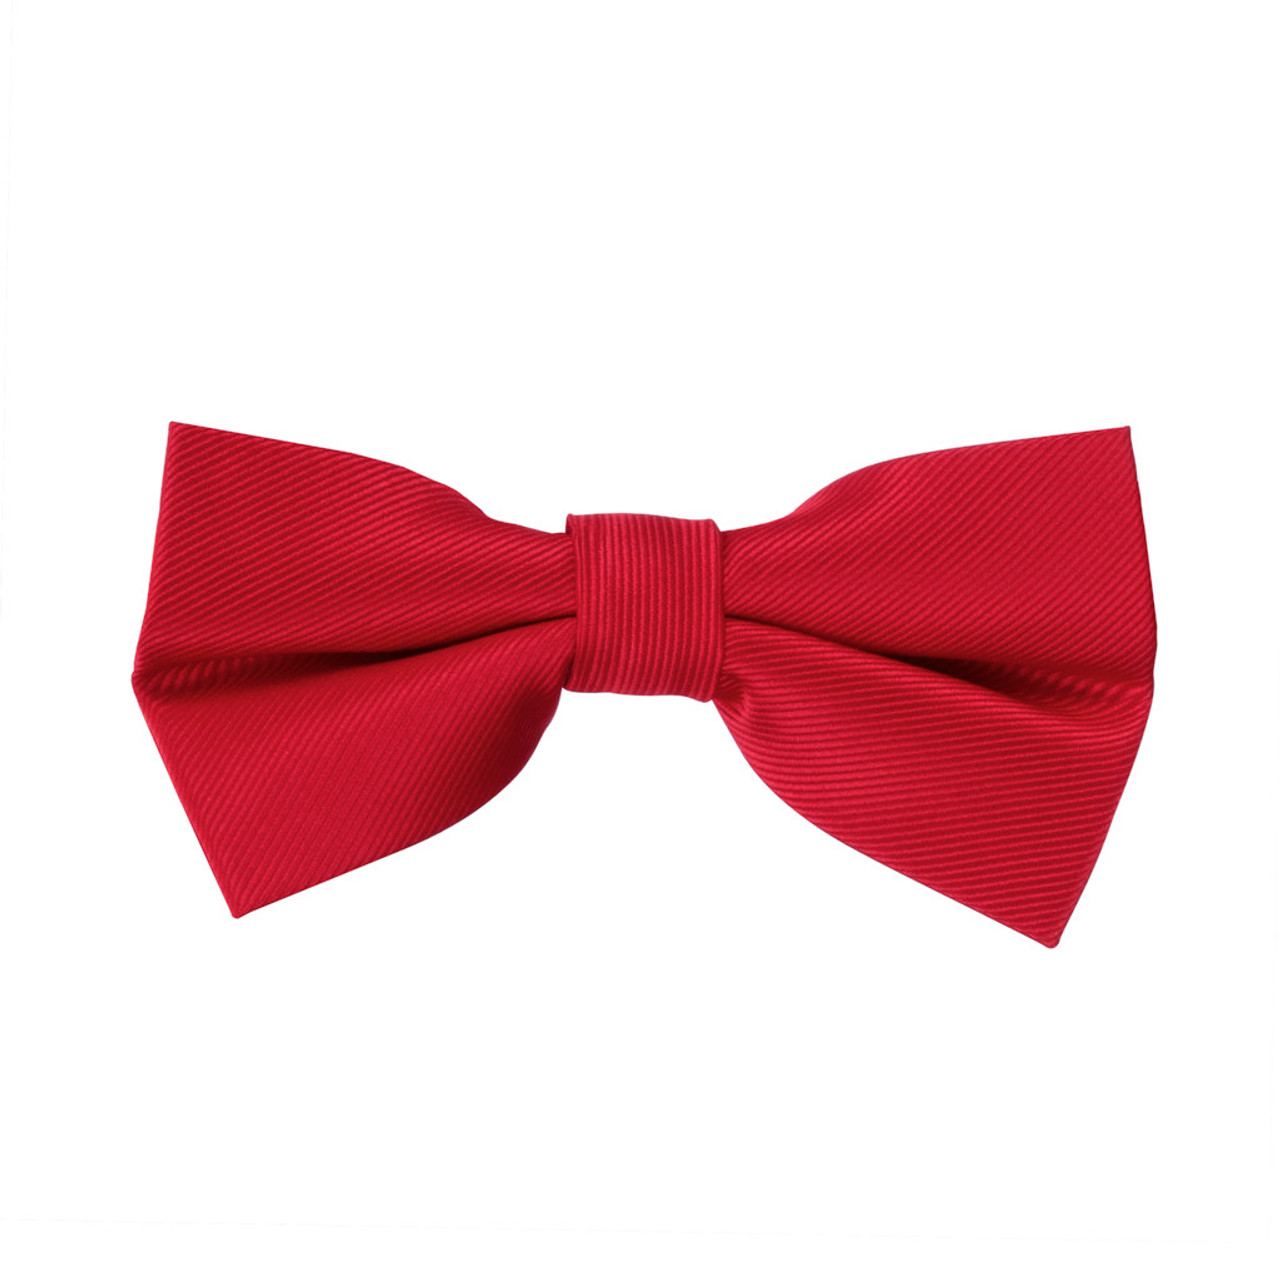 https://cdn11.bigcommerce.com/s-kfd5yug4bp/images/stencil/1280x1280/products/4923/12466/BowTie-Tw-Red-Front-MW-3__48351.1569613062.jpg?c=2